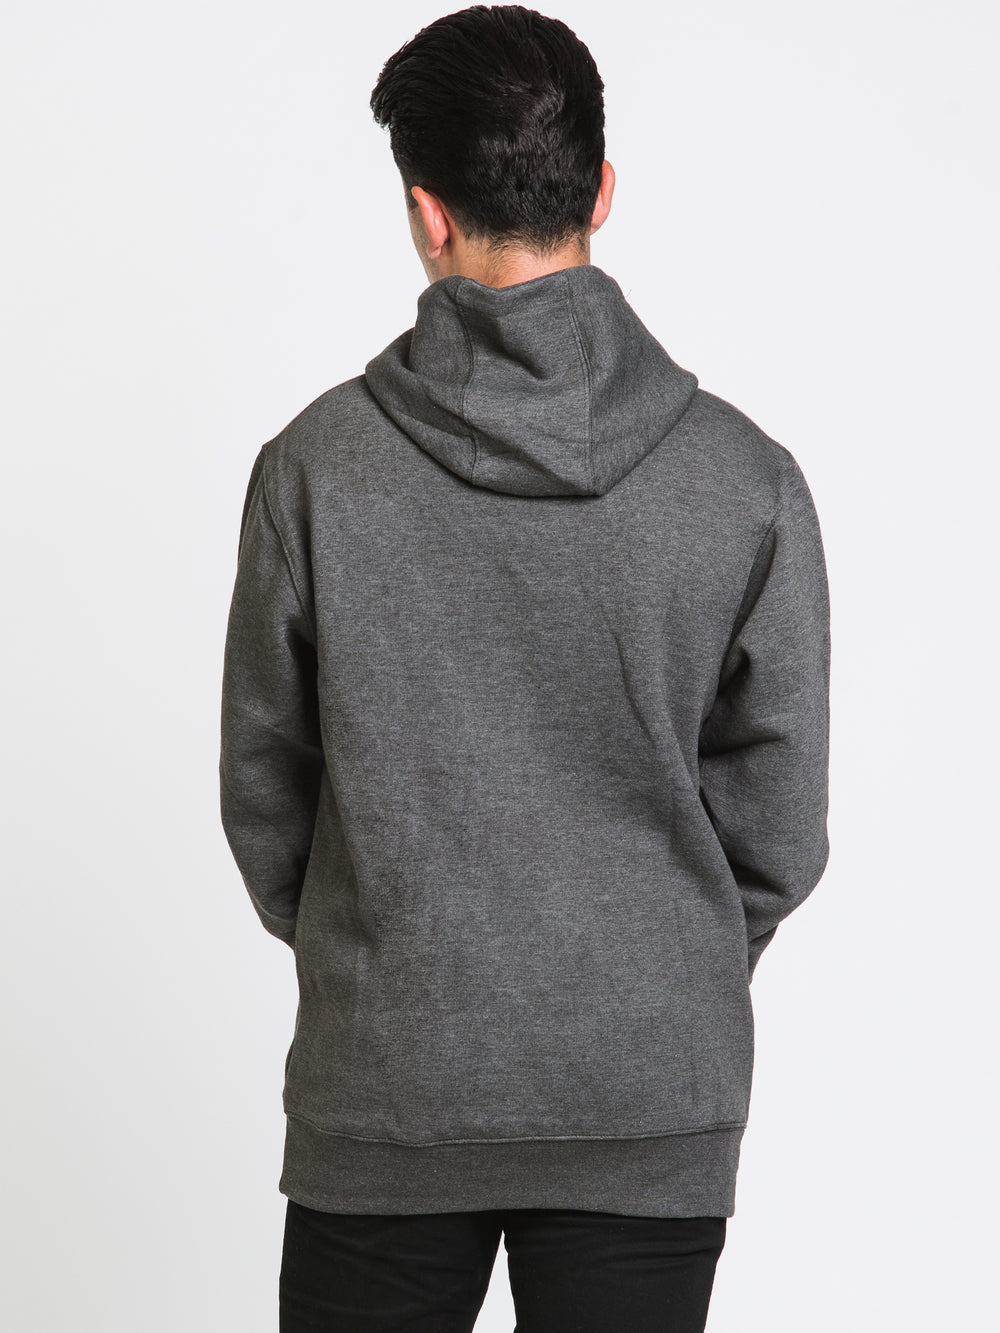 RED DRAGON OG PULLOVER HOODIE - CLEARANCE